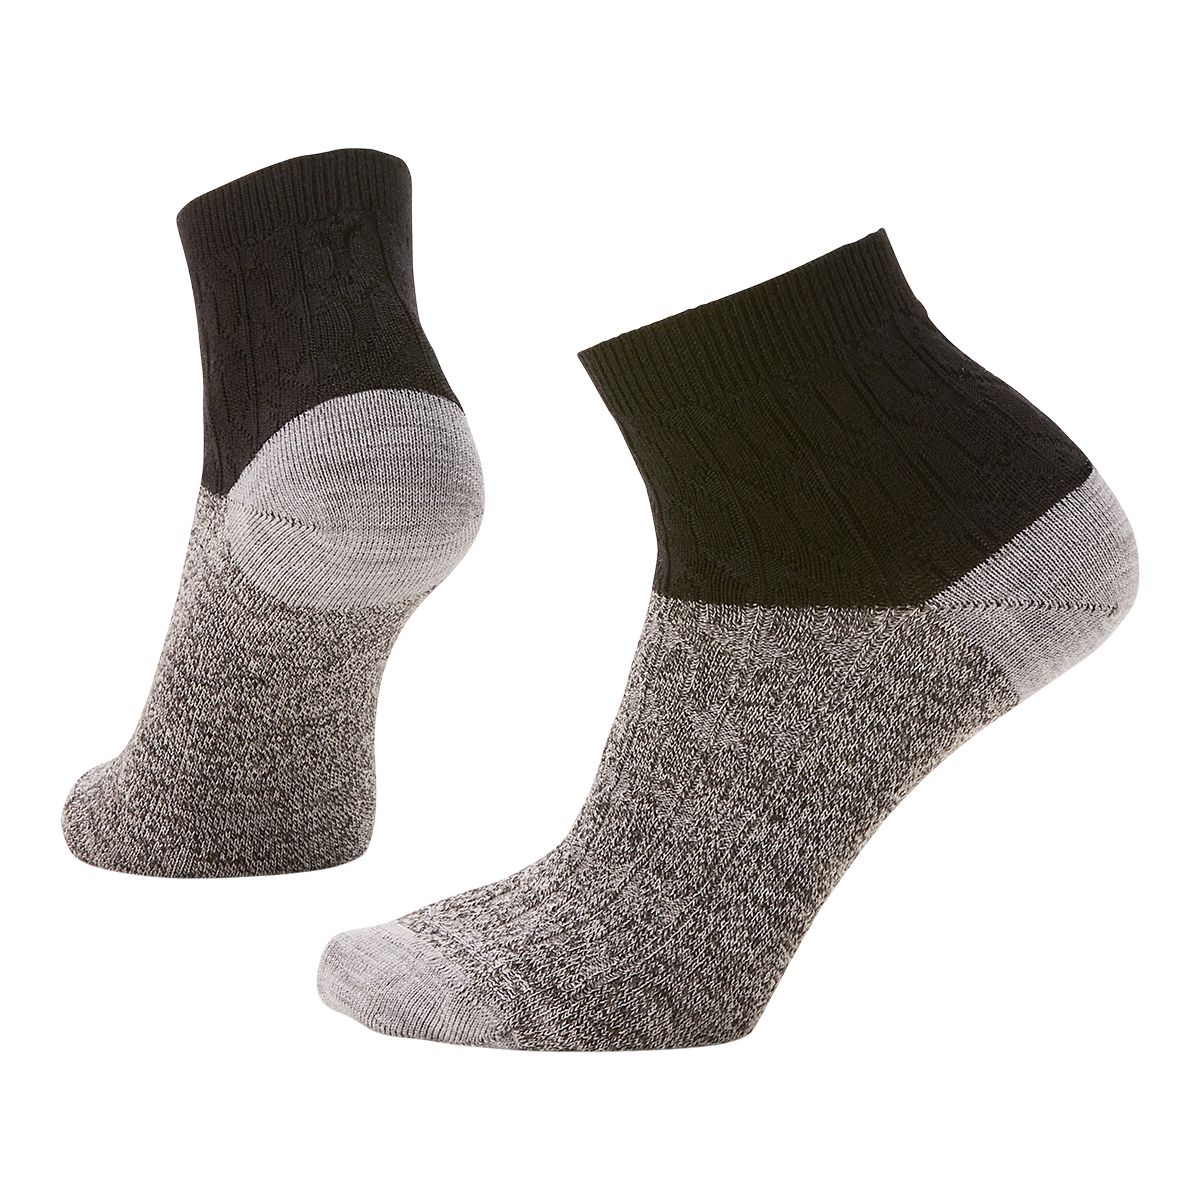 Image of Smartwool Women's Cable Boot Socks